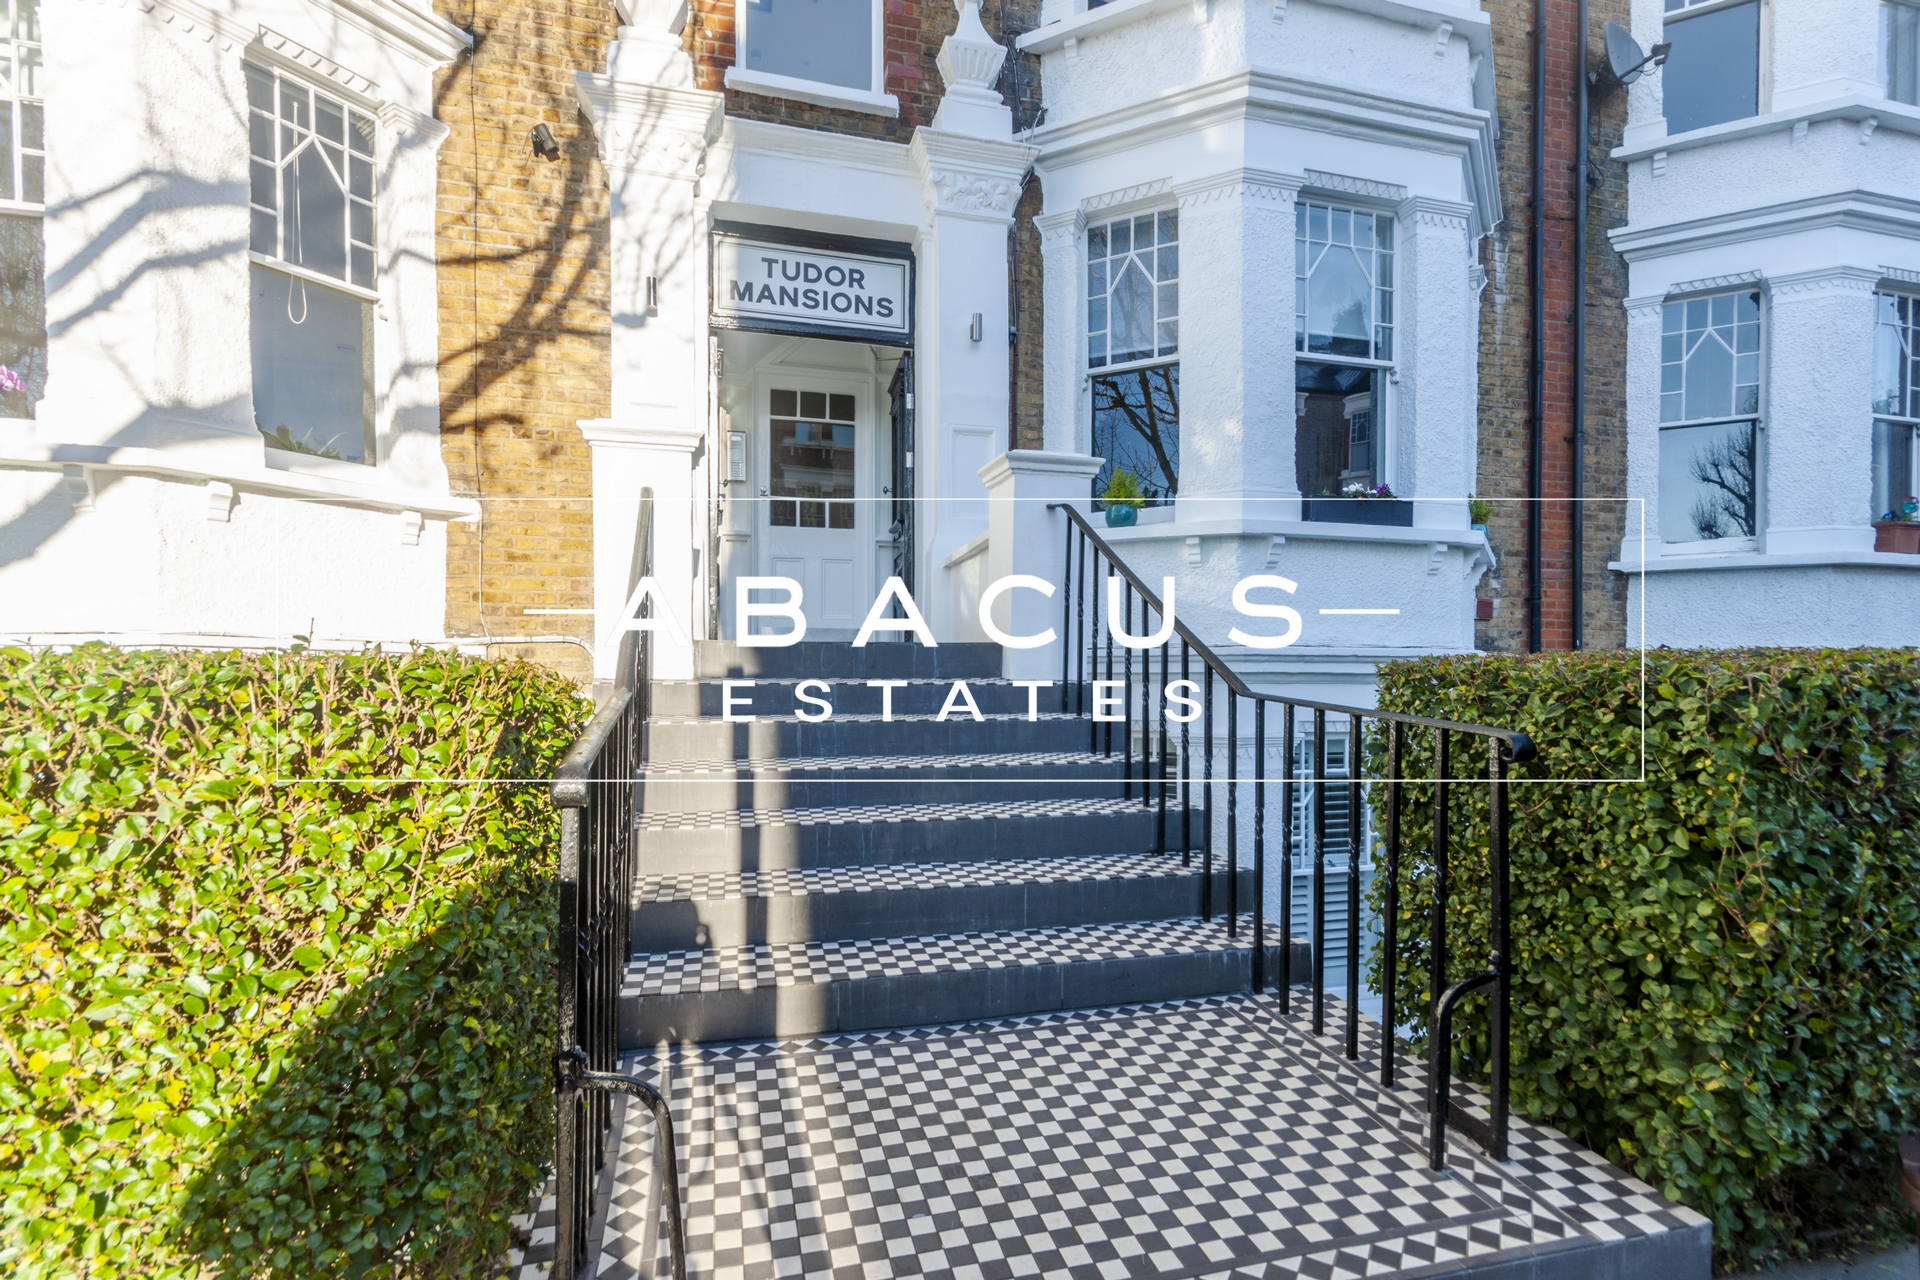 3 Bedroom Mansion Block to rent in West Hampstead, London, NW6